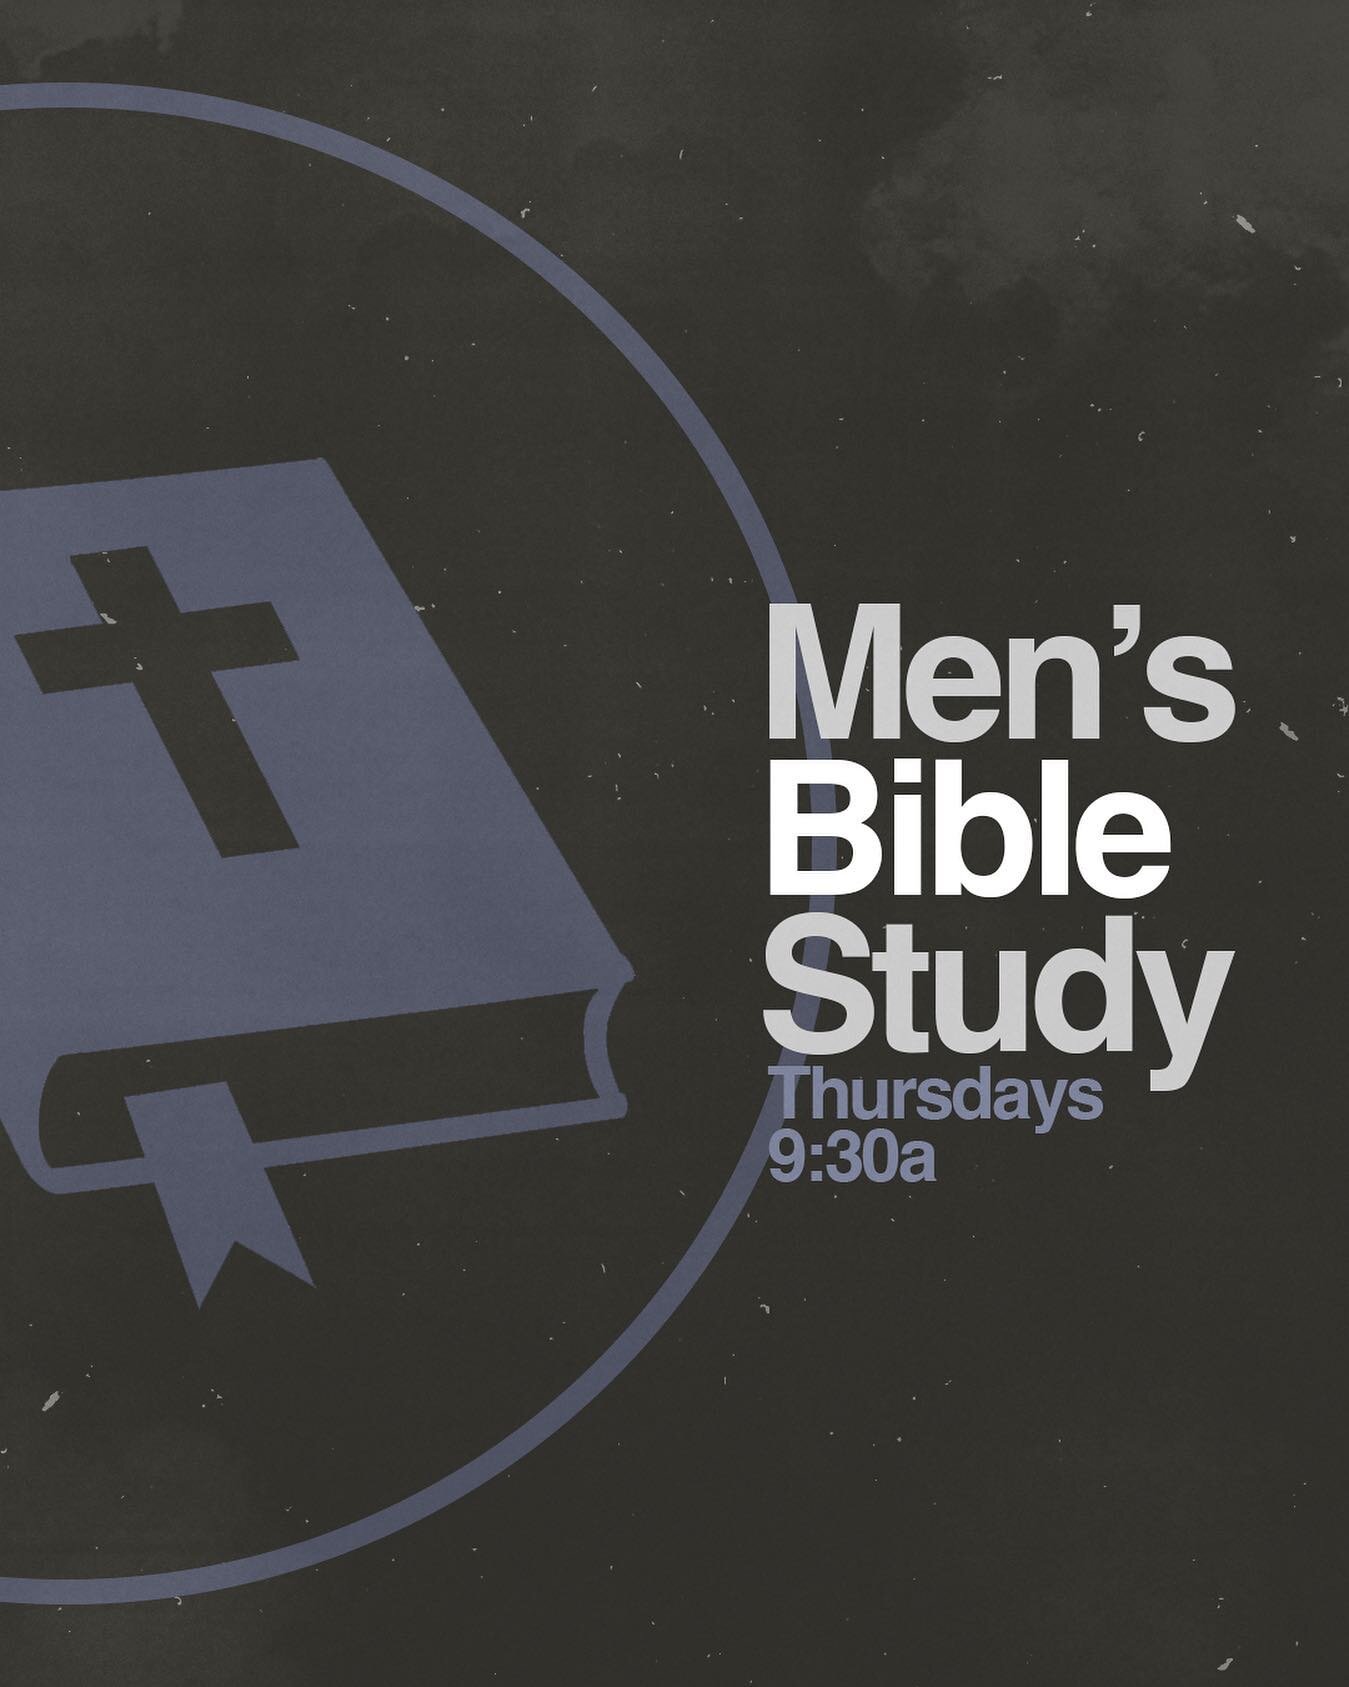 Men, starting September 15th, we&rsquo;ll be gathering for a time of fellowship and study.

We&rsquo;re continuing our time through the wonderful book of Acts, starting in chapter 15. 

Email 1wallace@comcast.net with any questions or to receive the 